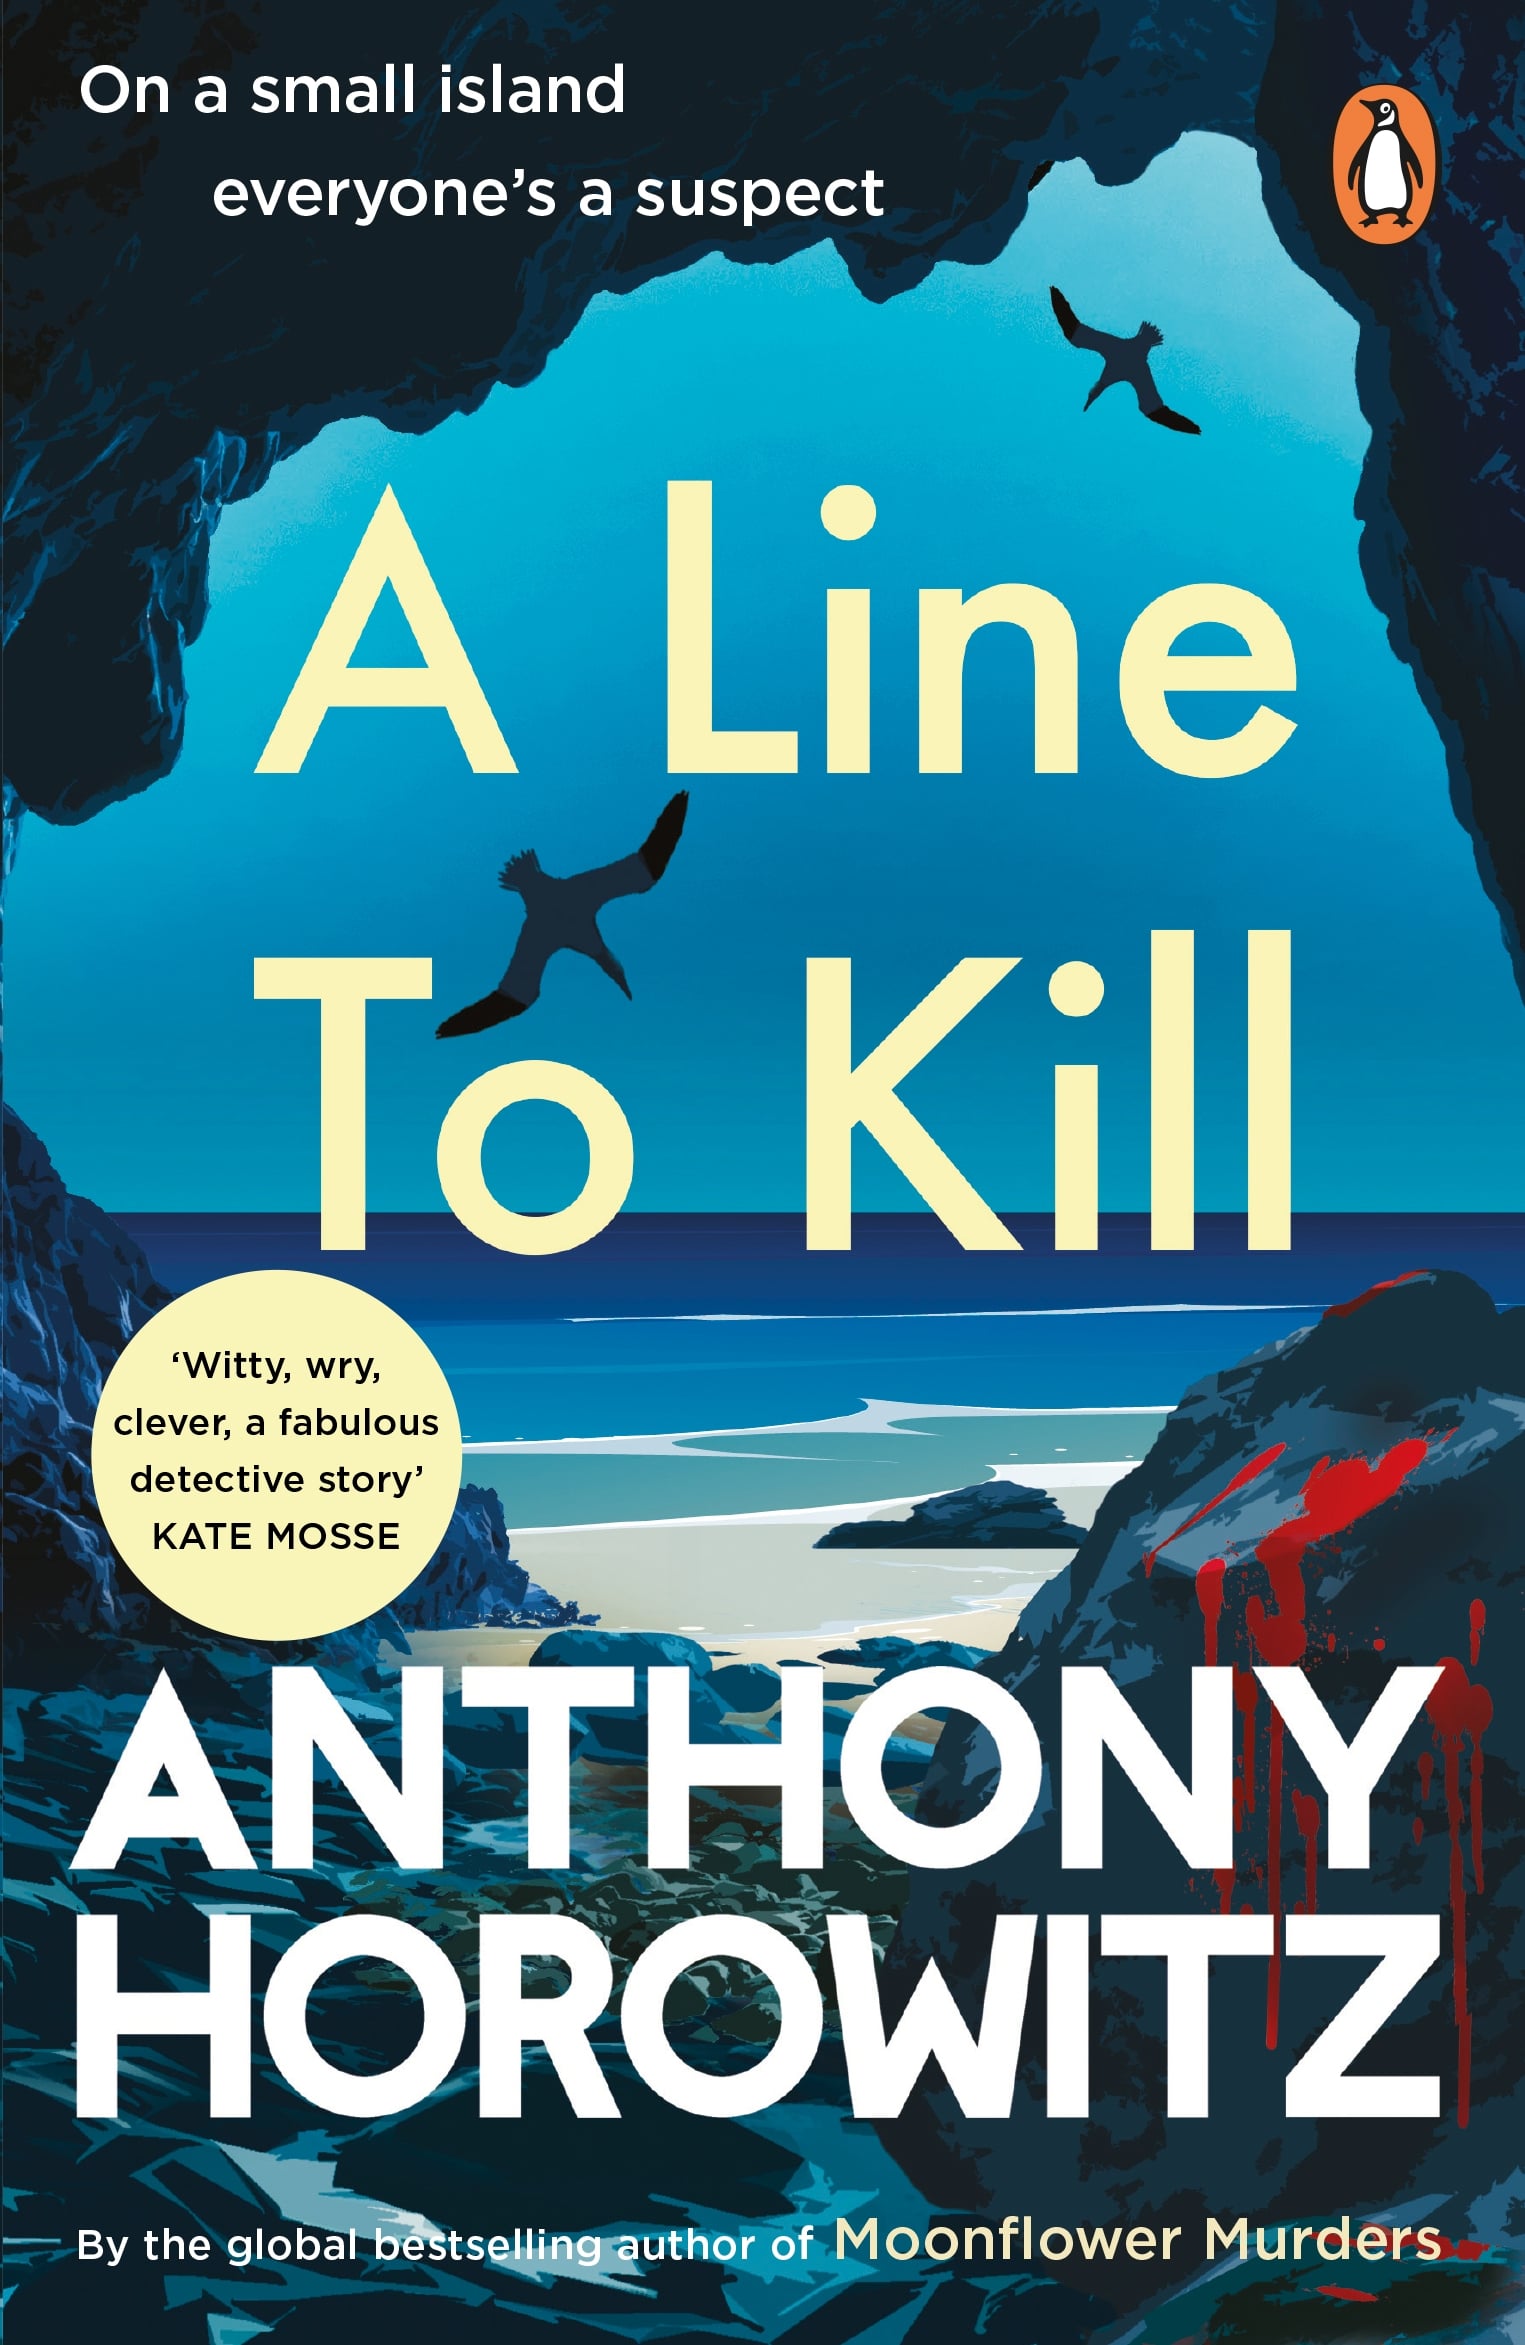 Book cover of A Line to Kill by Anthony Horowitz, book 3 in the Hawthorne and Horowitz series